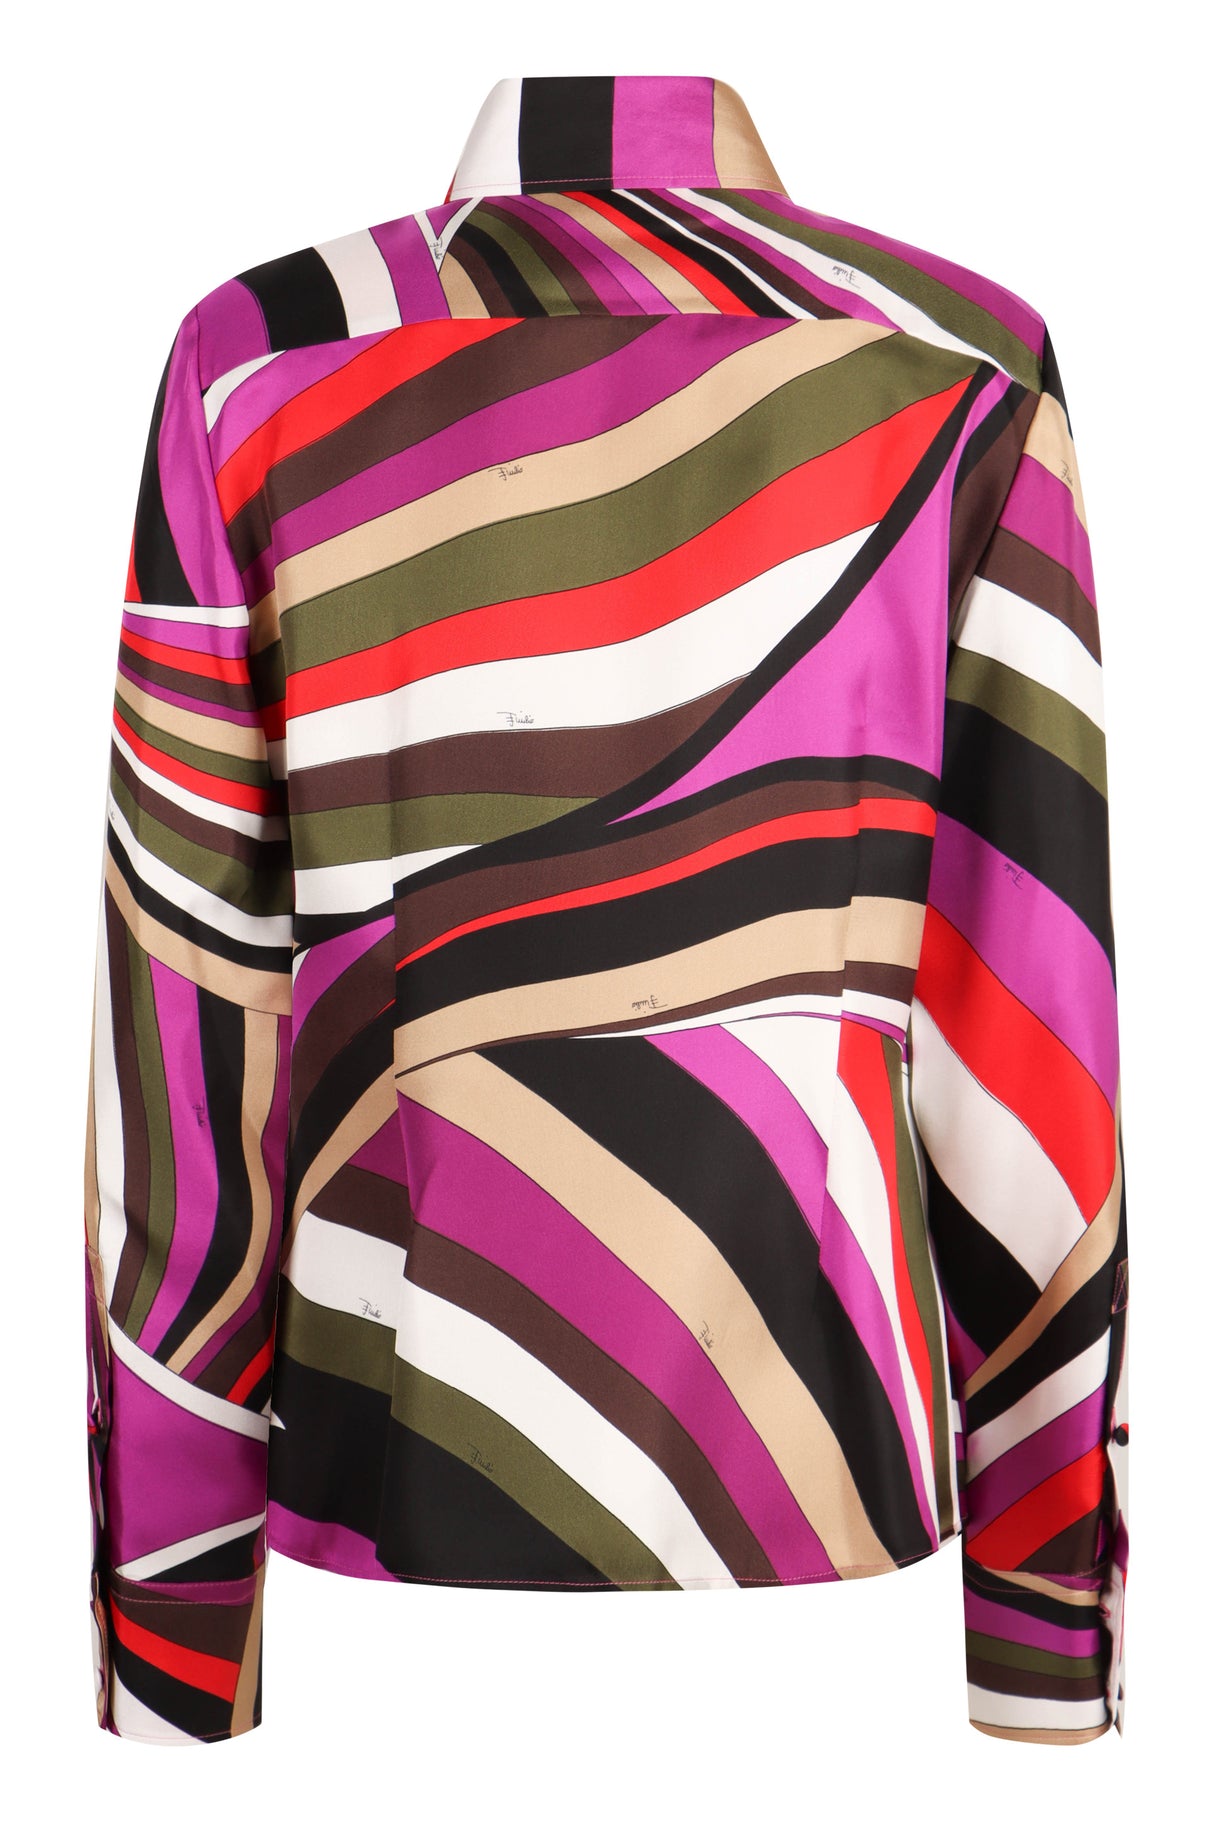 EMILIO PUCCI Women's Pink Printed Silk Shirt - SS24 Collection